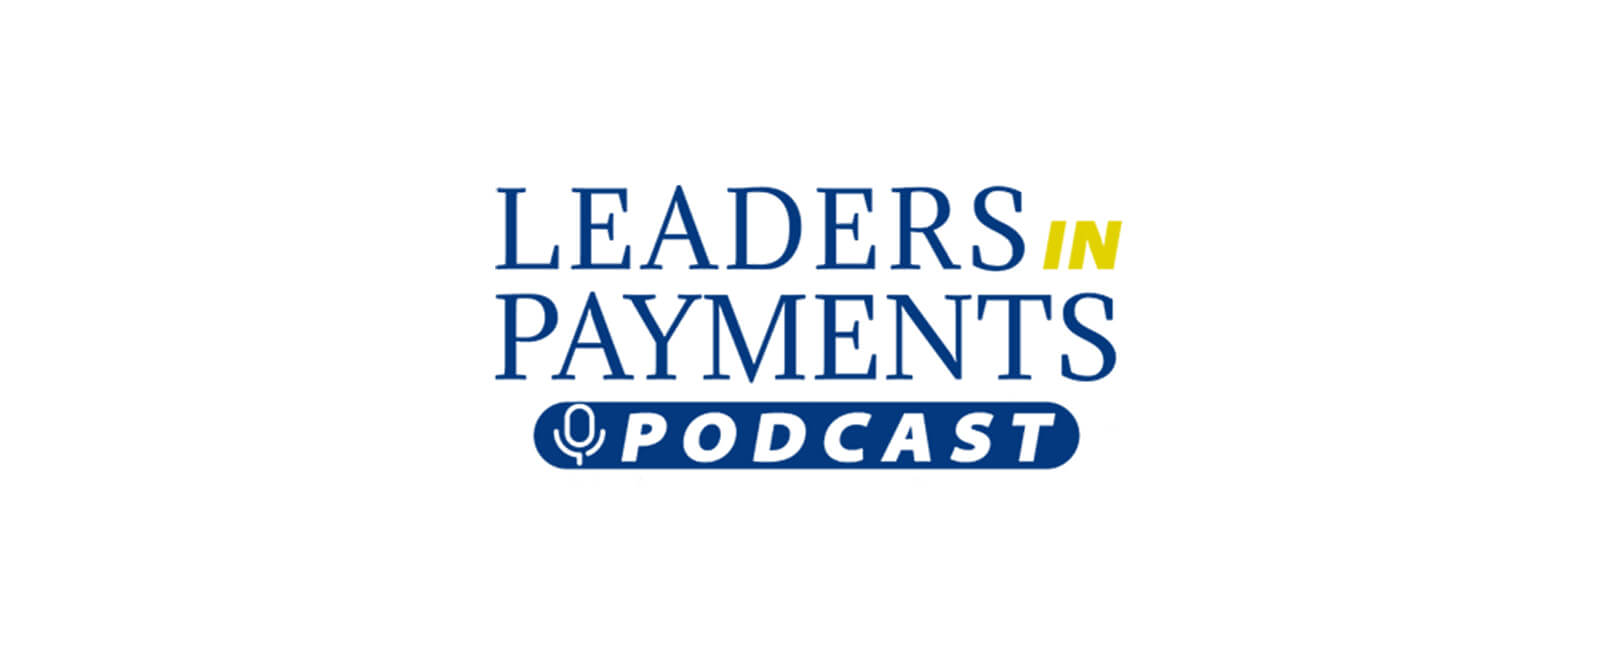 Monica Eaton, CEO of Chargebacks911®, on the Leaders in Payments Podcast